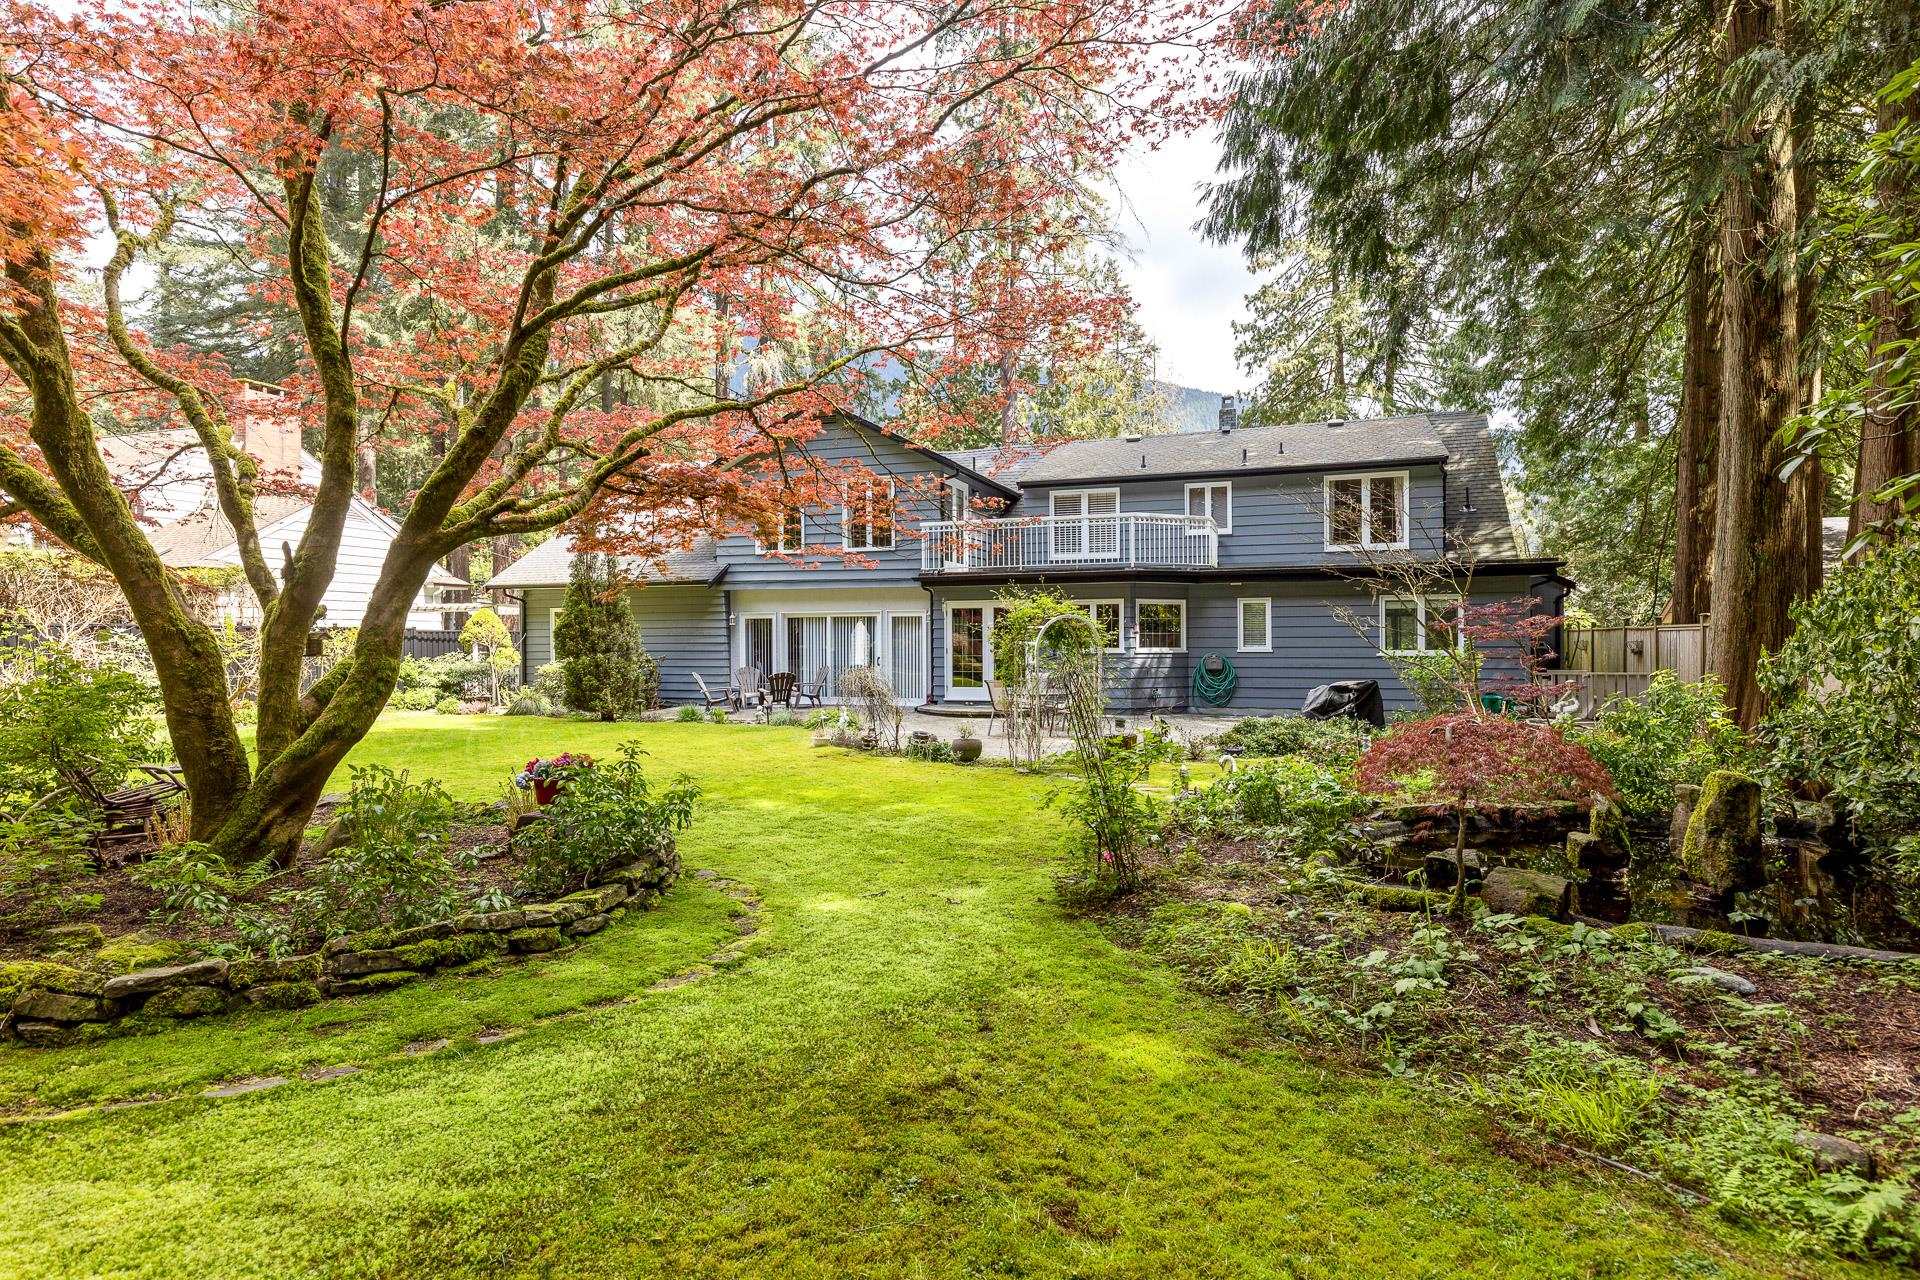 Listing image of 4825 CAPILANO ROAD